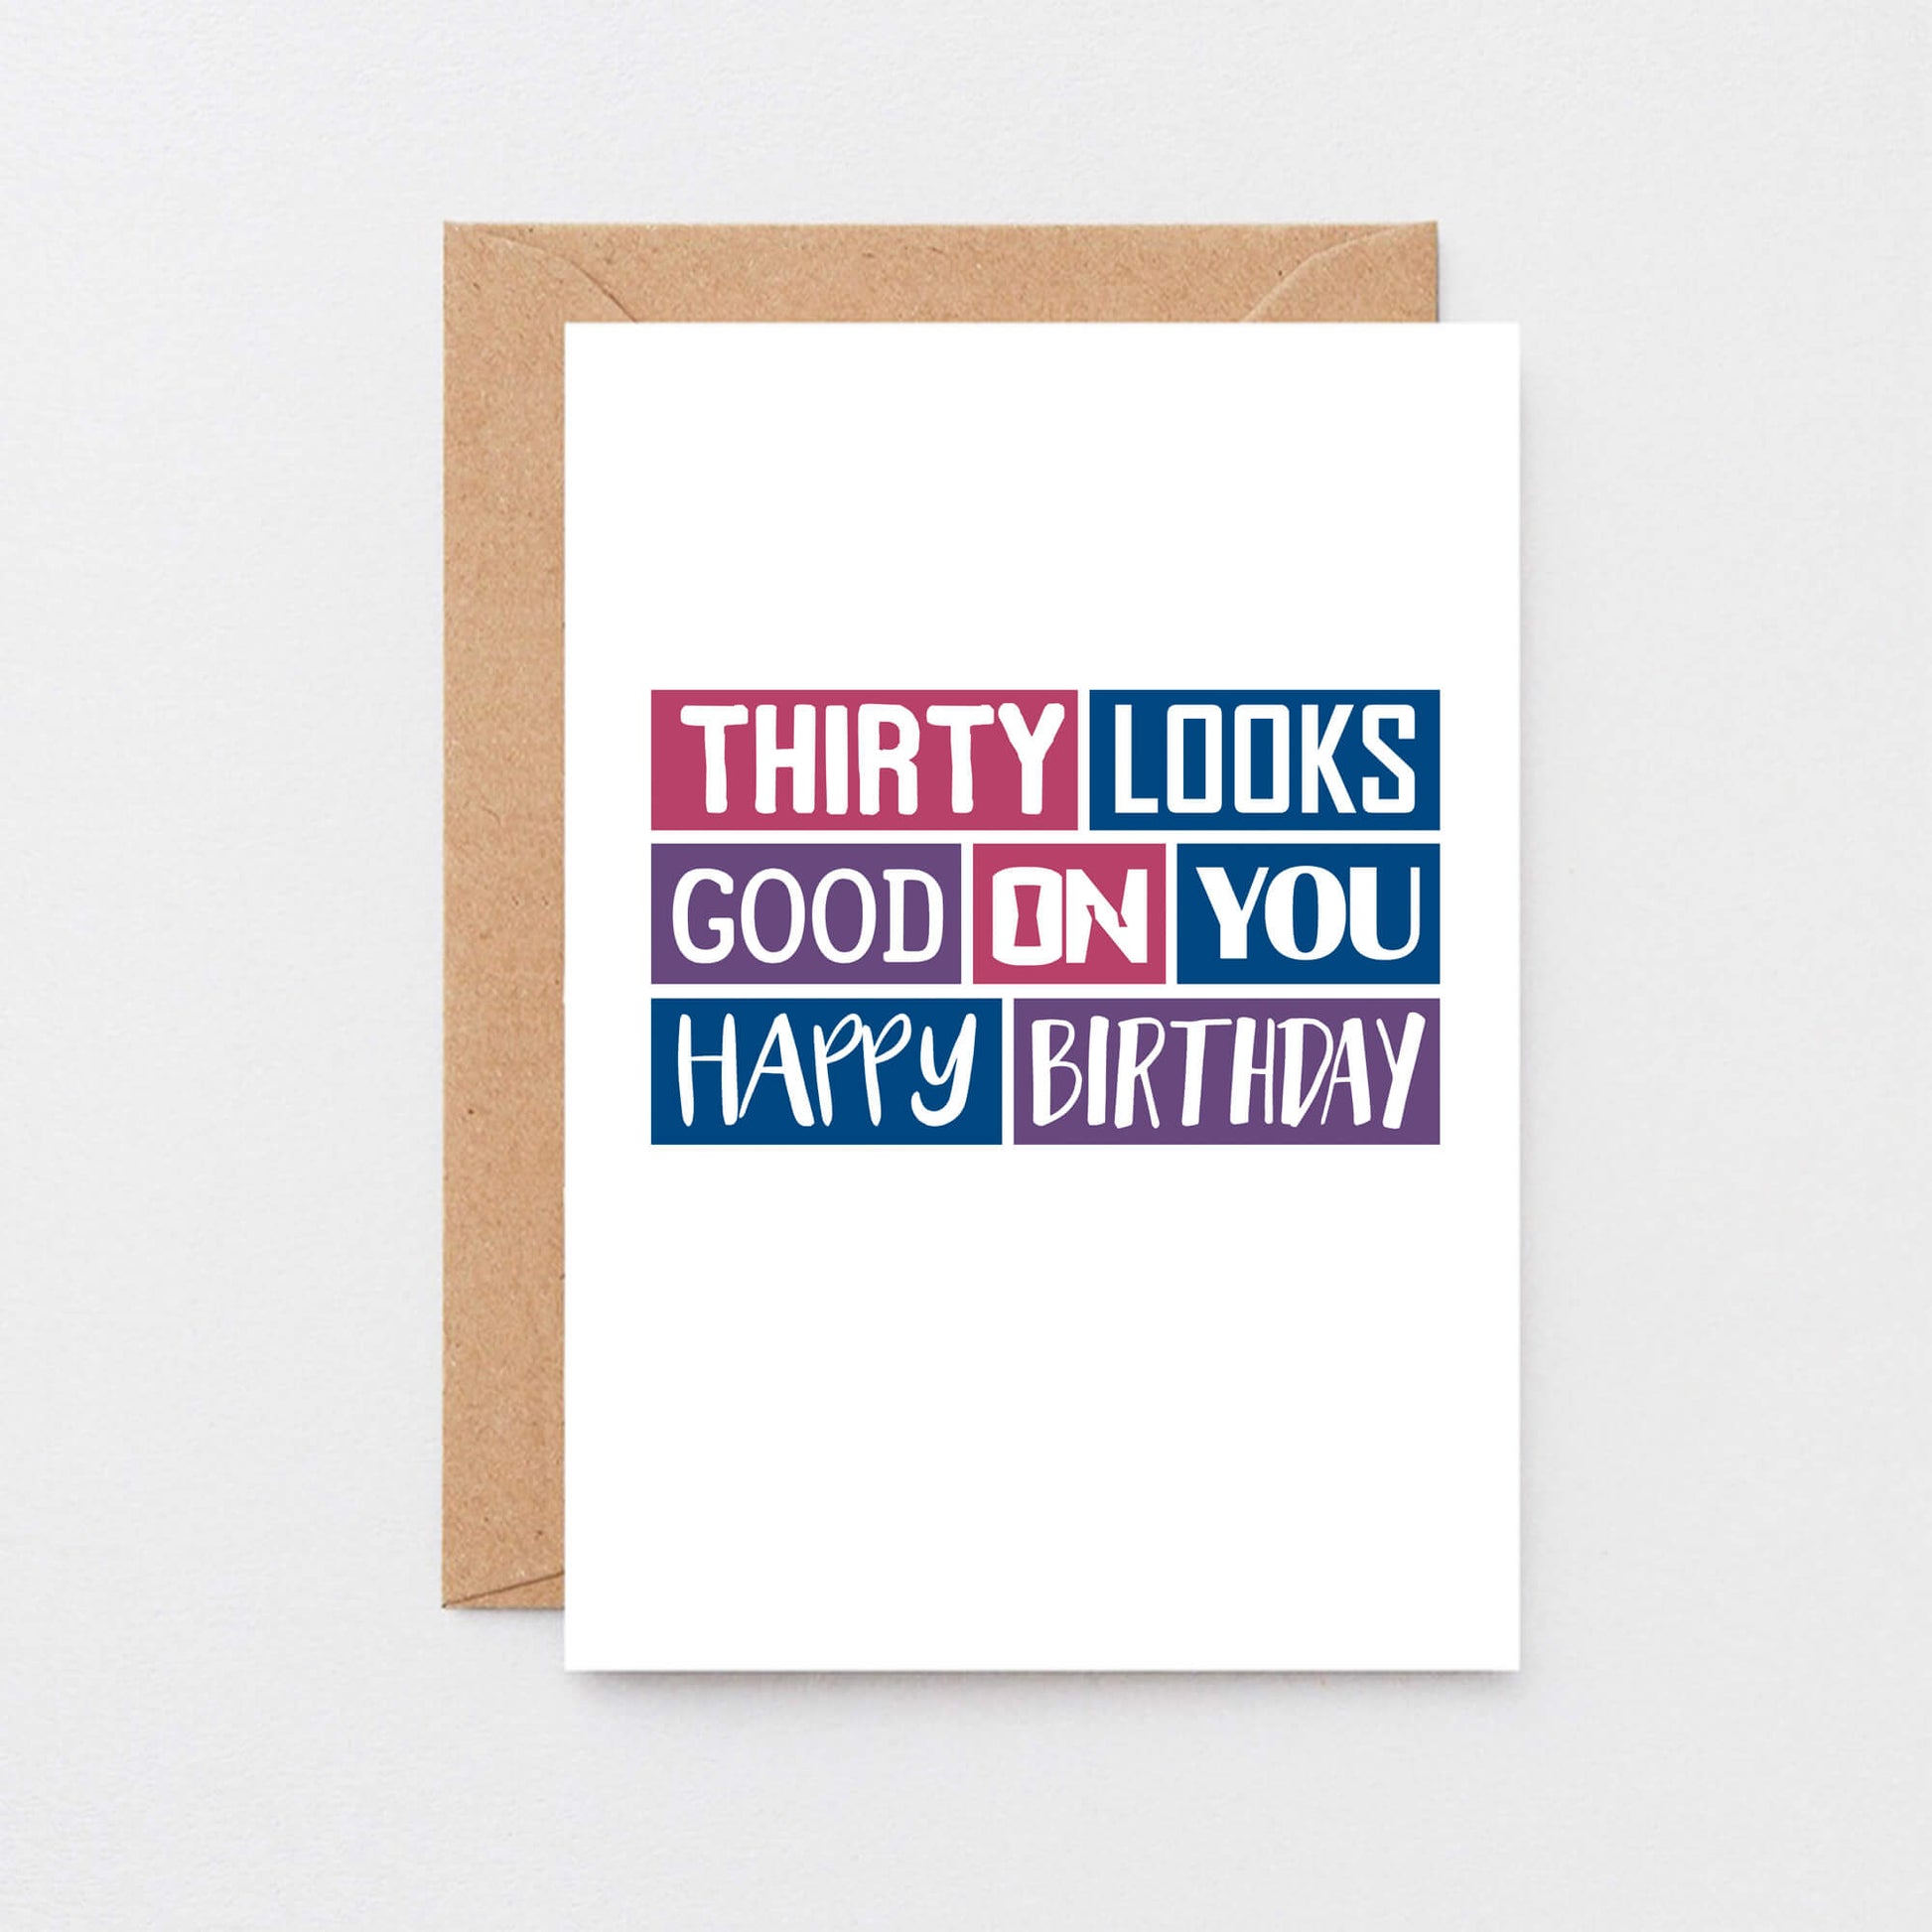 30th Birthday Card by SixElevenCreations. Reads Thirty looks good on you. Happy birthday. Product Code SE0226A6